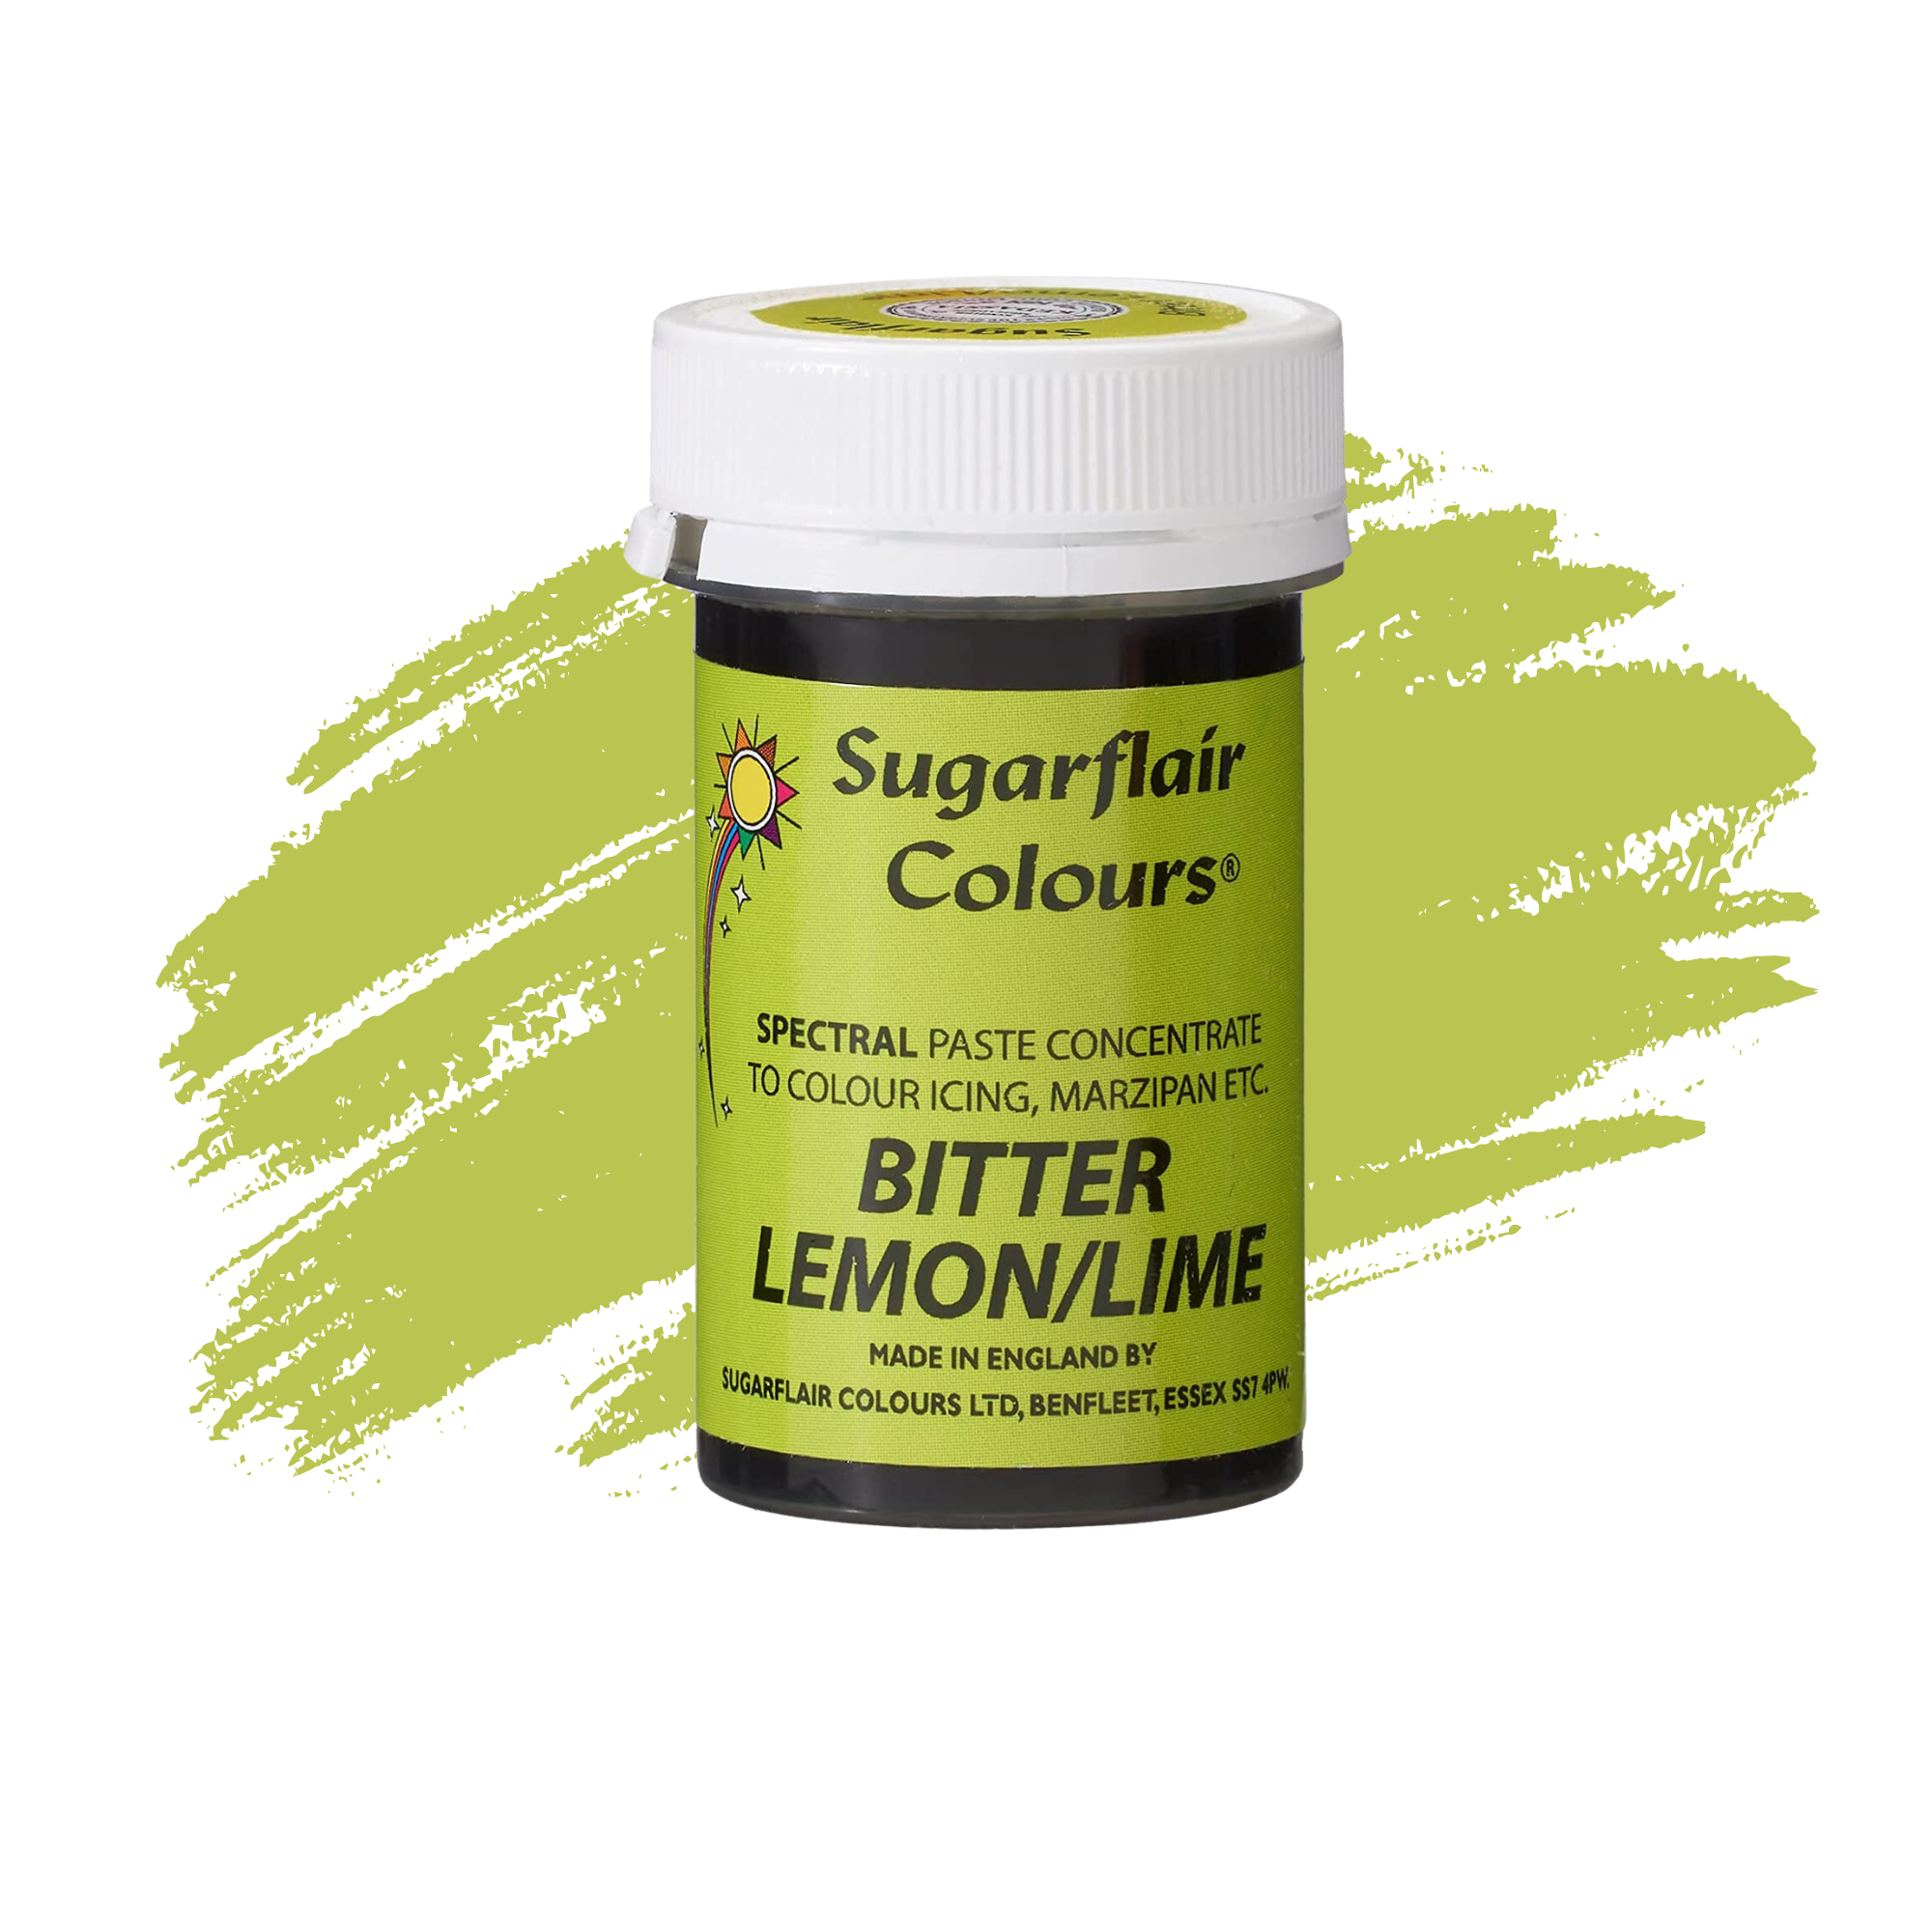 Sugarflair Paste Colours Concentrated Food Colouring - Spectral Biter Lemon / Lime - 25g